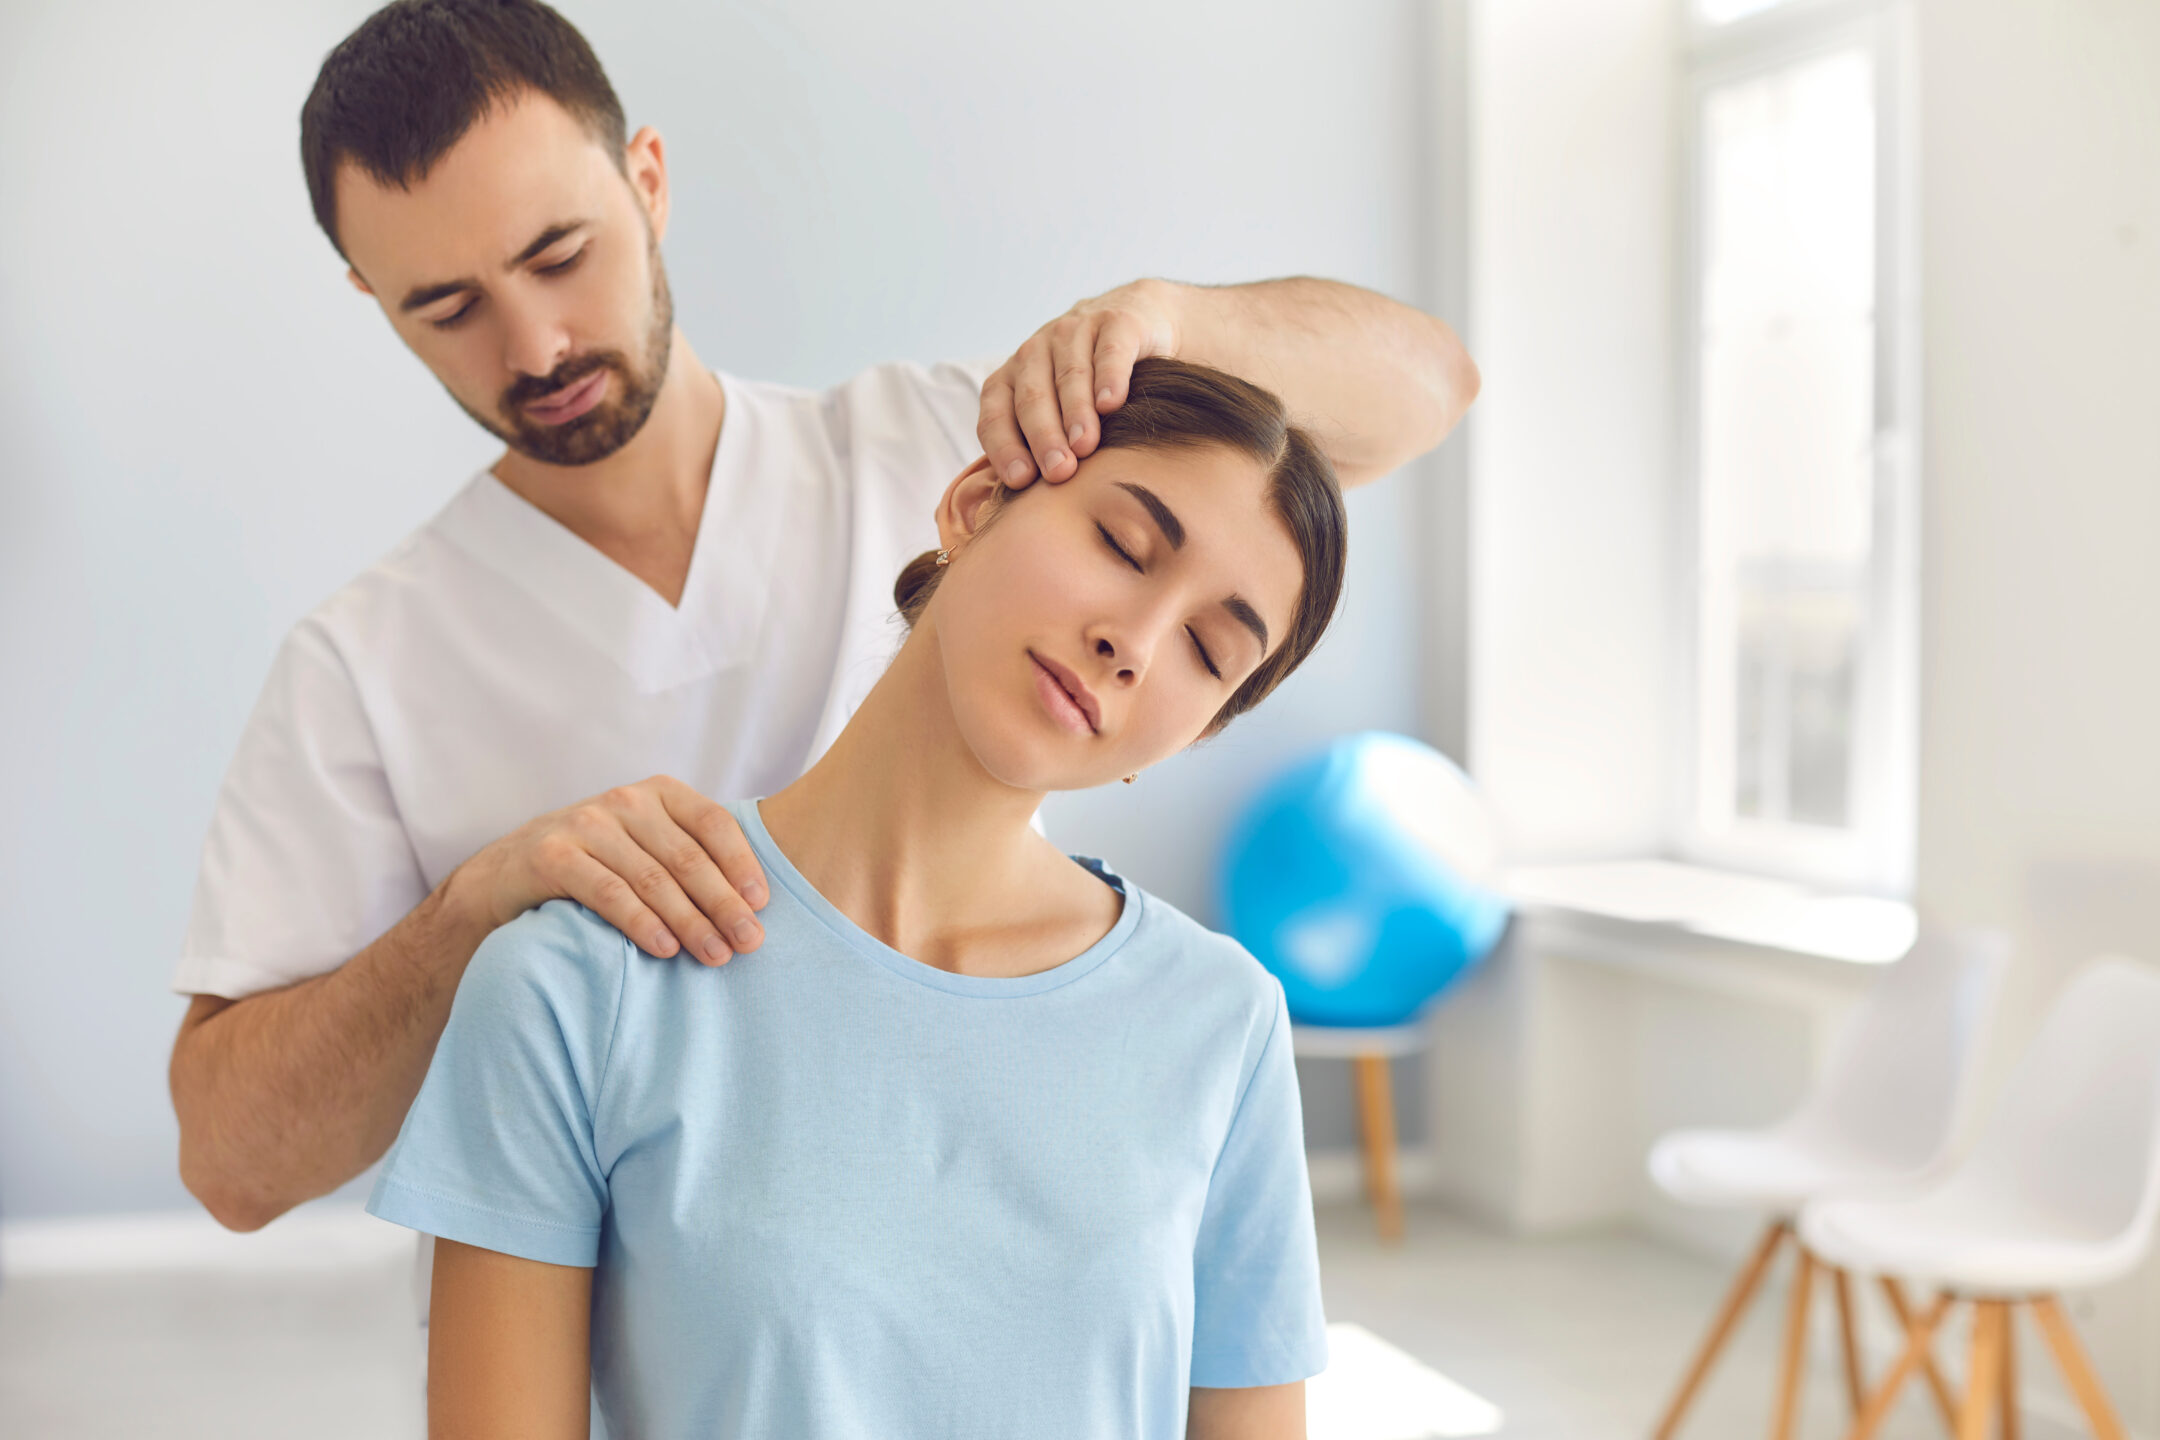 A chiropractor works on a patient’s neck.